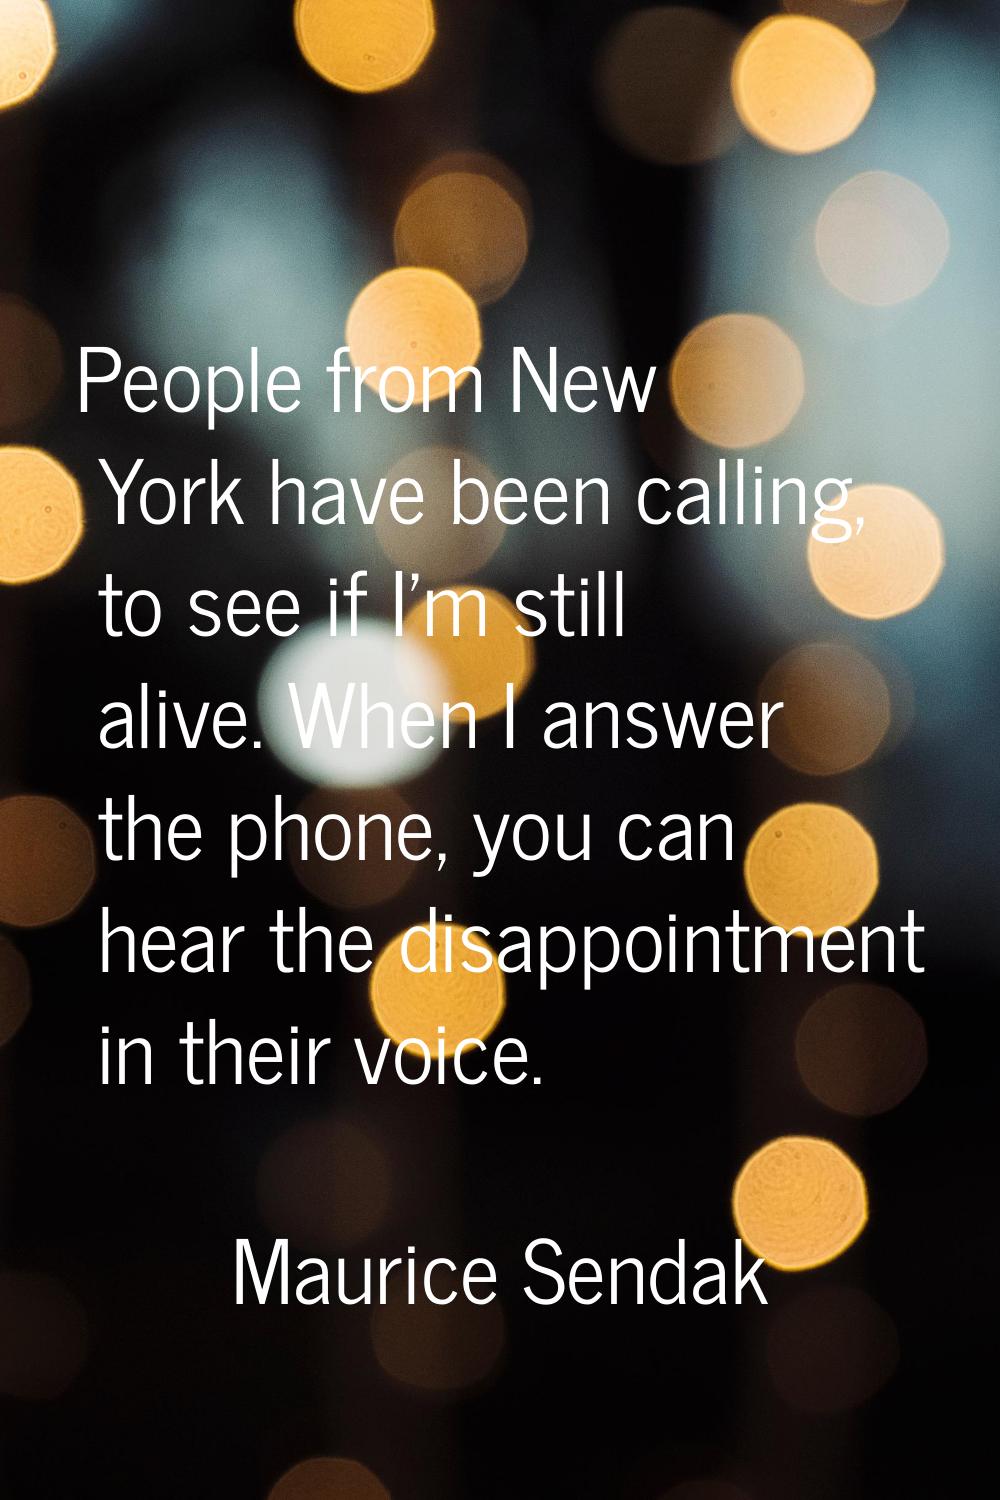 People from New York have been calling, to see if I'm still alive. When I answer the phone, you can